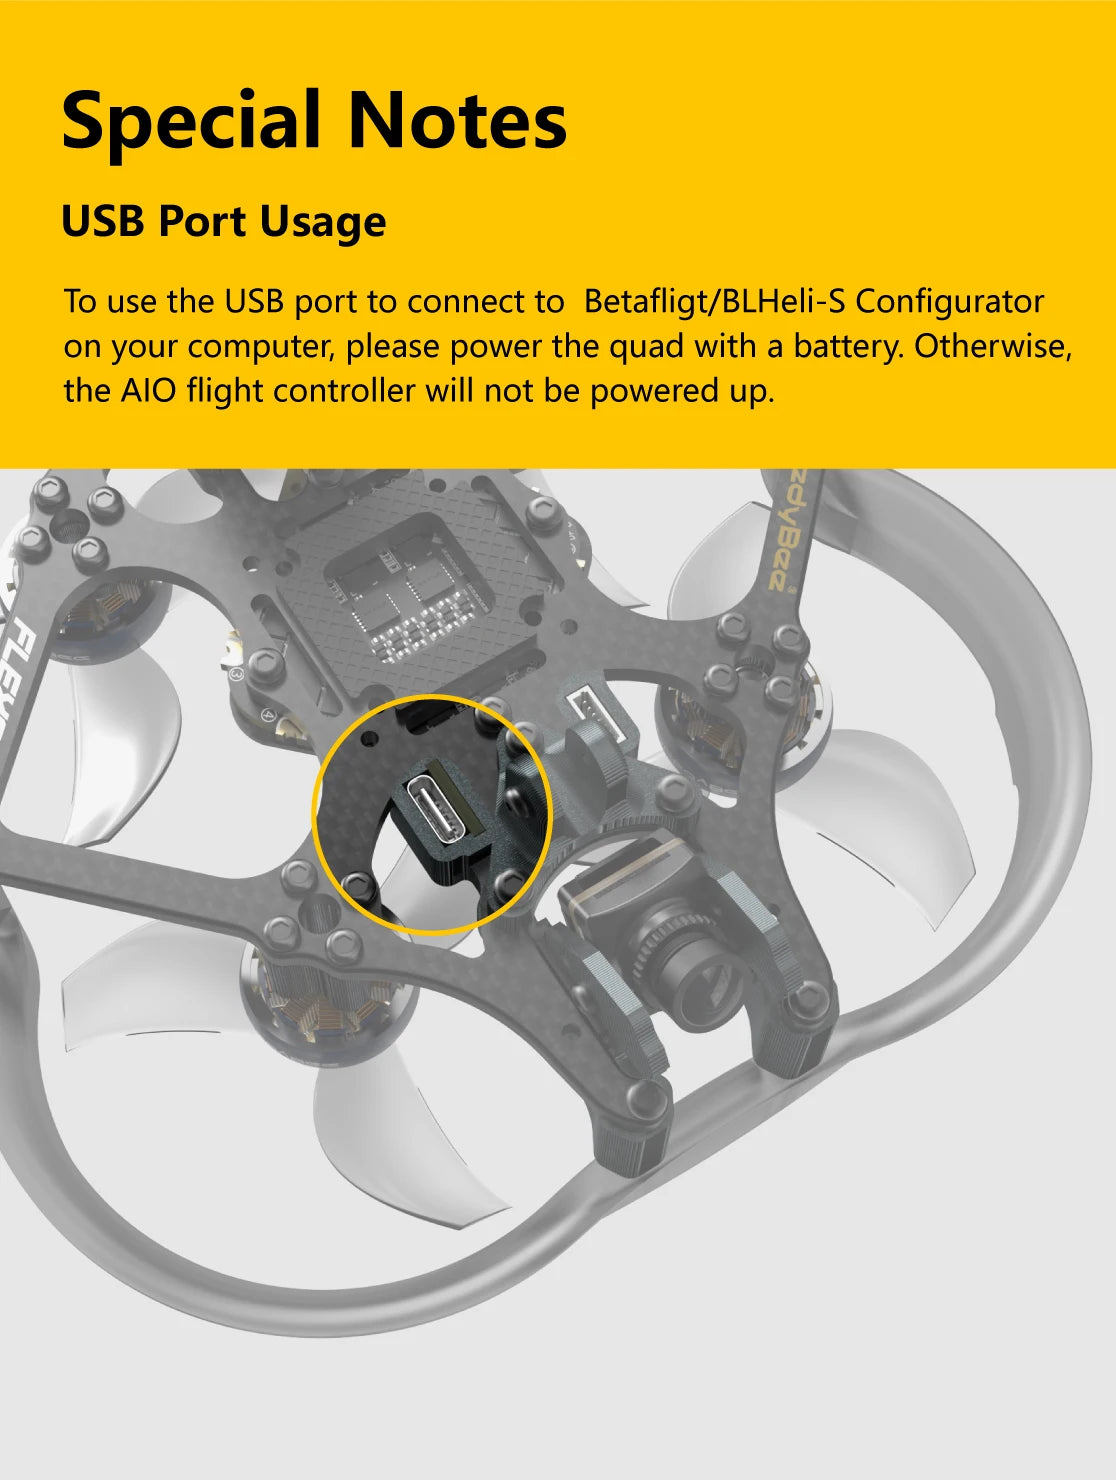 SpeedyBee F745 FreeStyle FPV Drone, Betafligt/BLHeli-S Configurator will not be powered up 